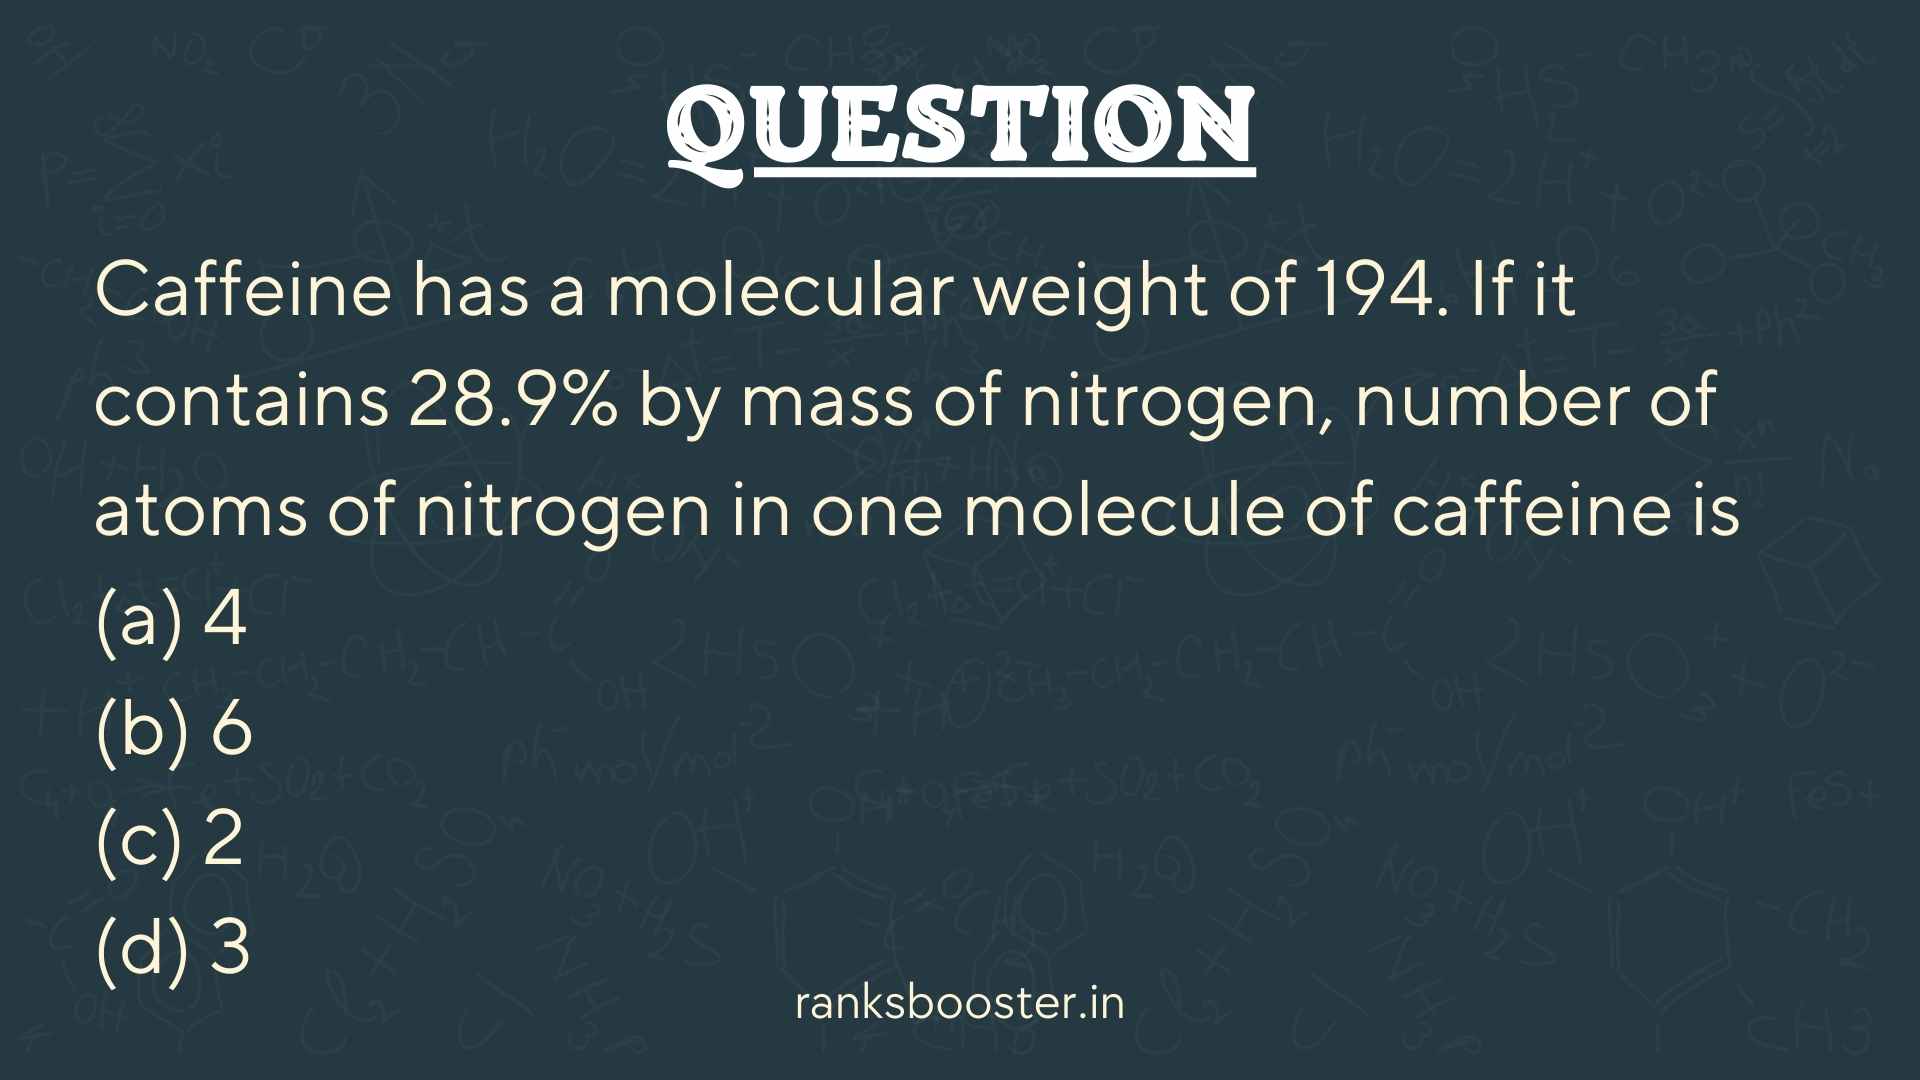 Question: Caffeine has a molecular weight of 194. If it contains 28.9% by mass of nitrogen, number of atoms of nitrogen in one molecule of caffeine is (a) 4 (b) 6 (c) 2 (d) 3